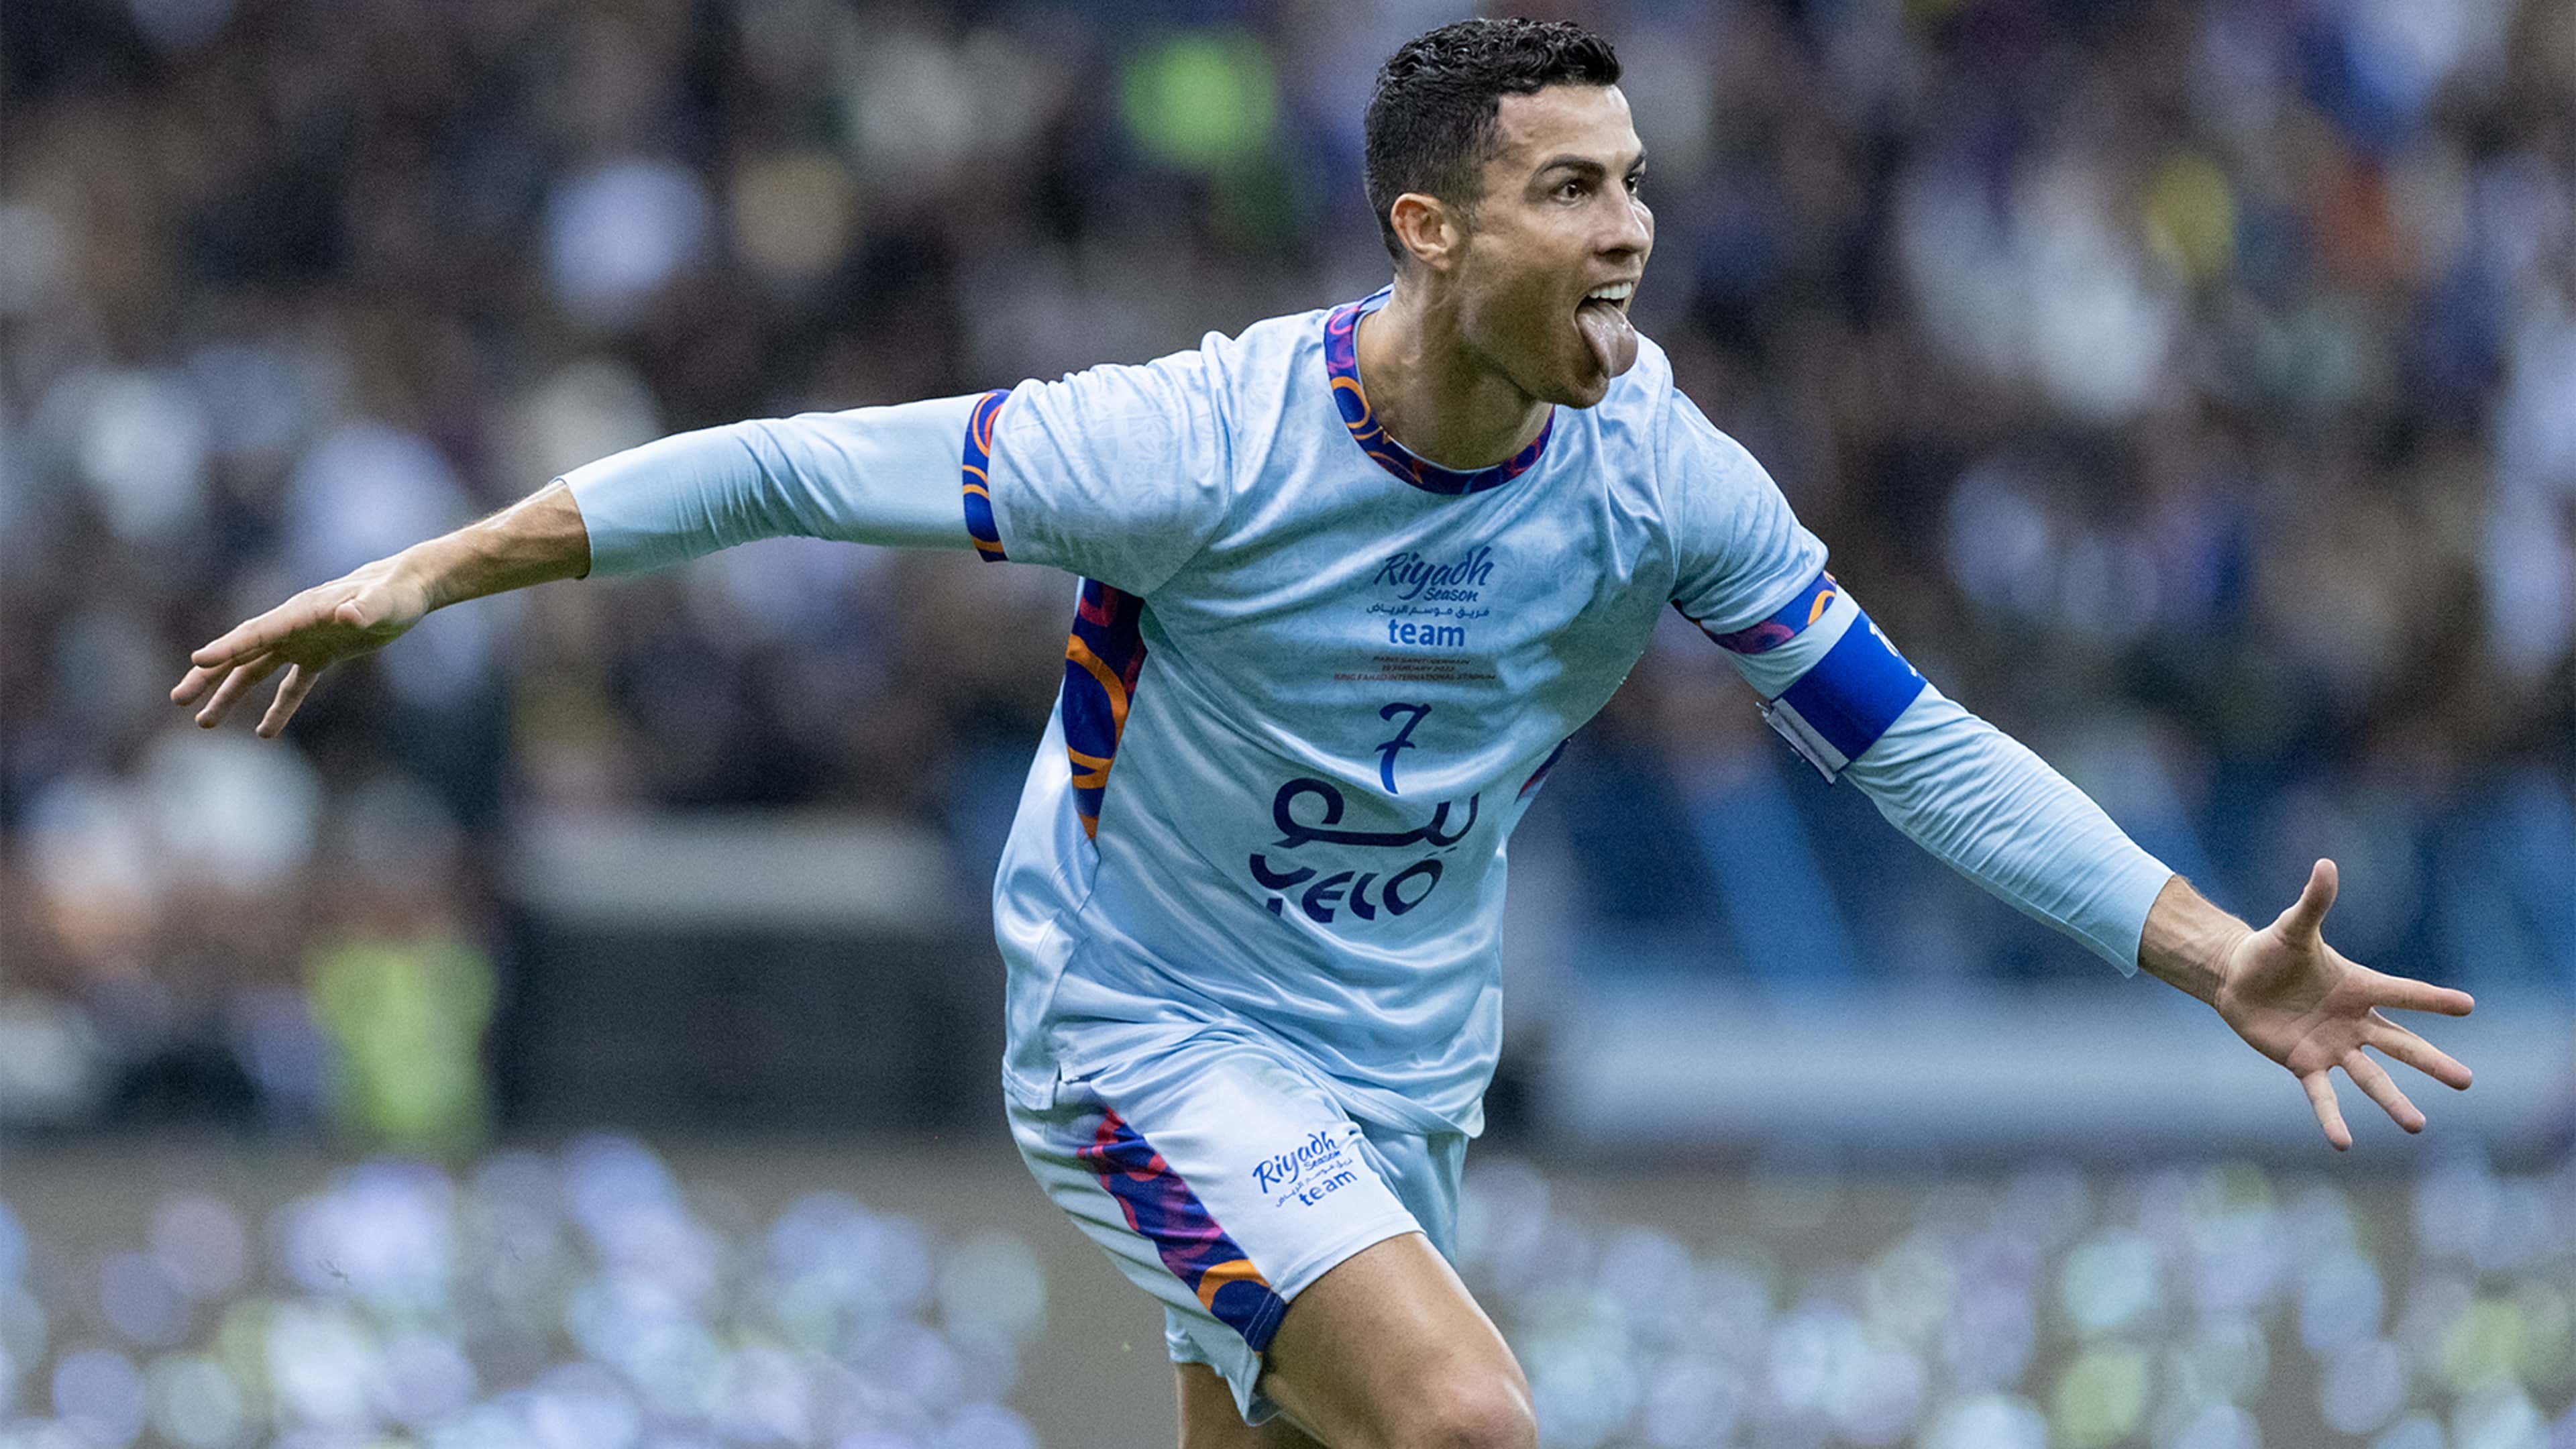 Watch: Ronaldo's two goals make difference vs. PSG 